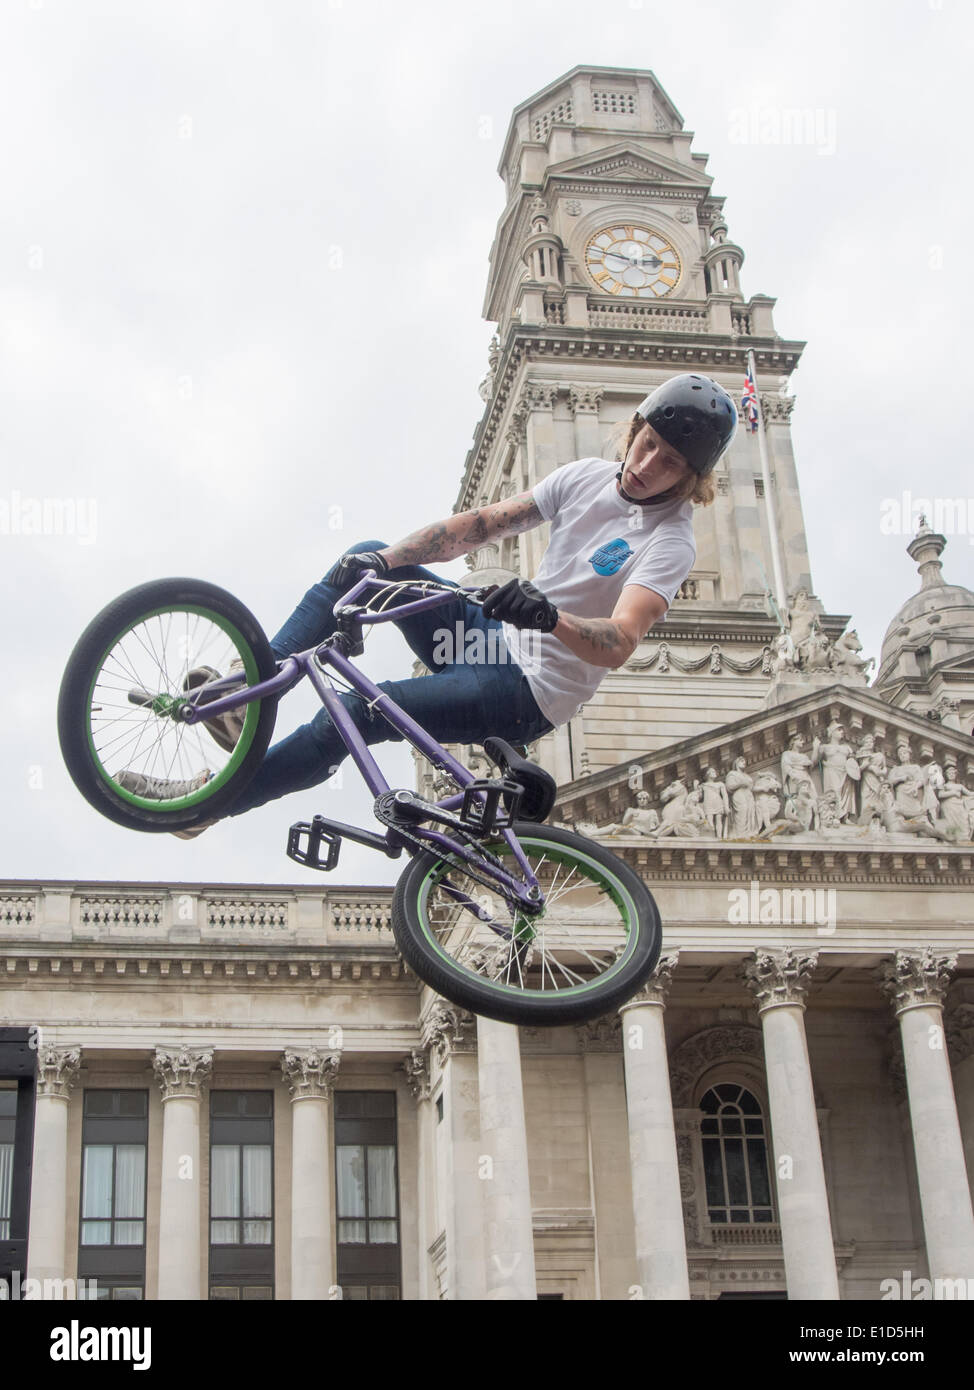 A BMX rider performs an aerial stunt in front of the Portsmouth Guildhall, during the Portsmouth street 2014 games funded by the Portsmouth cultural trust. Stock Photo